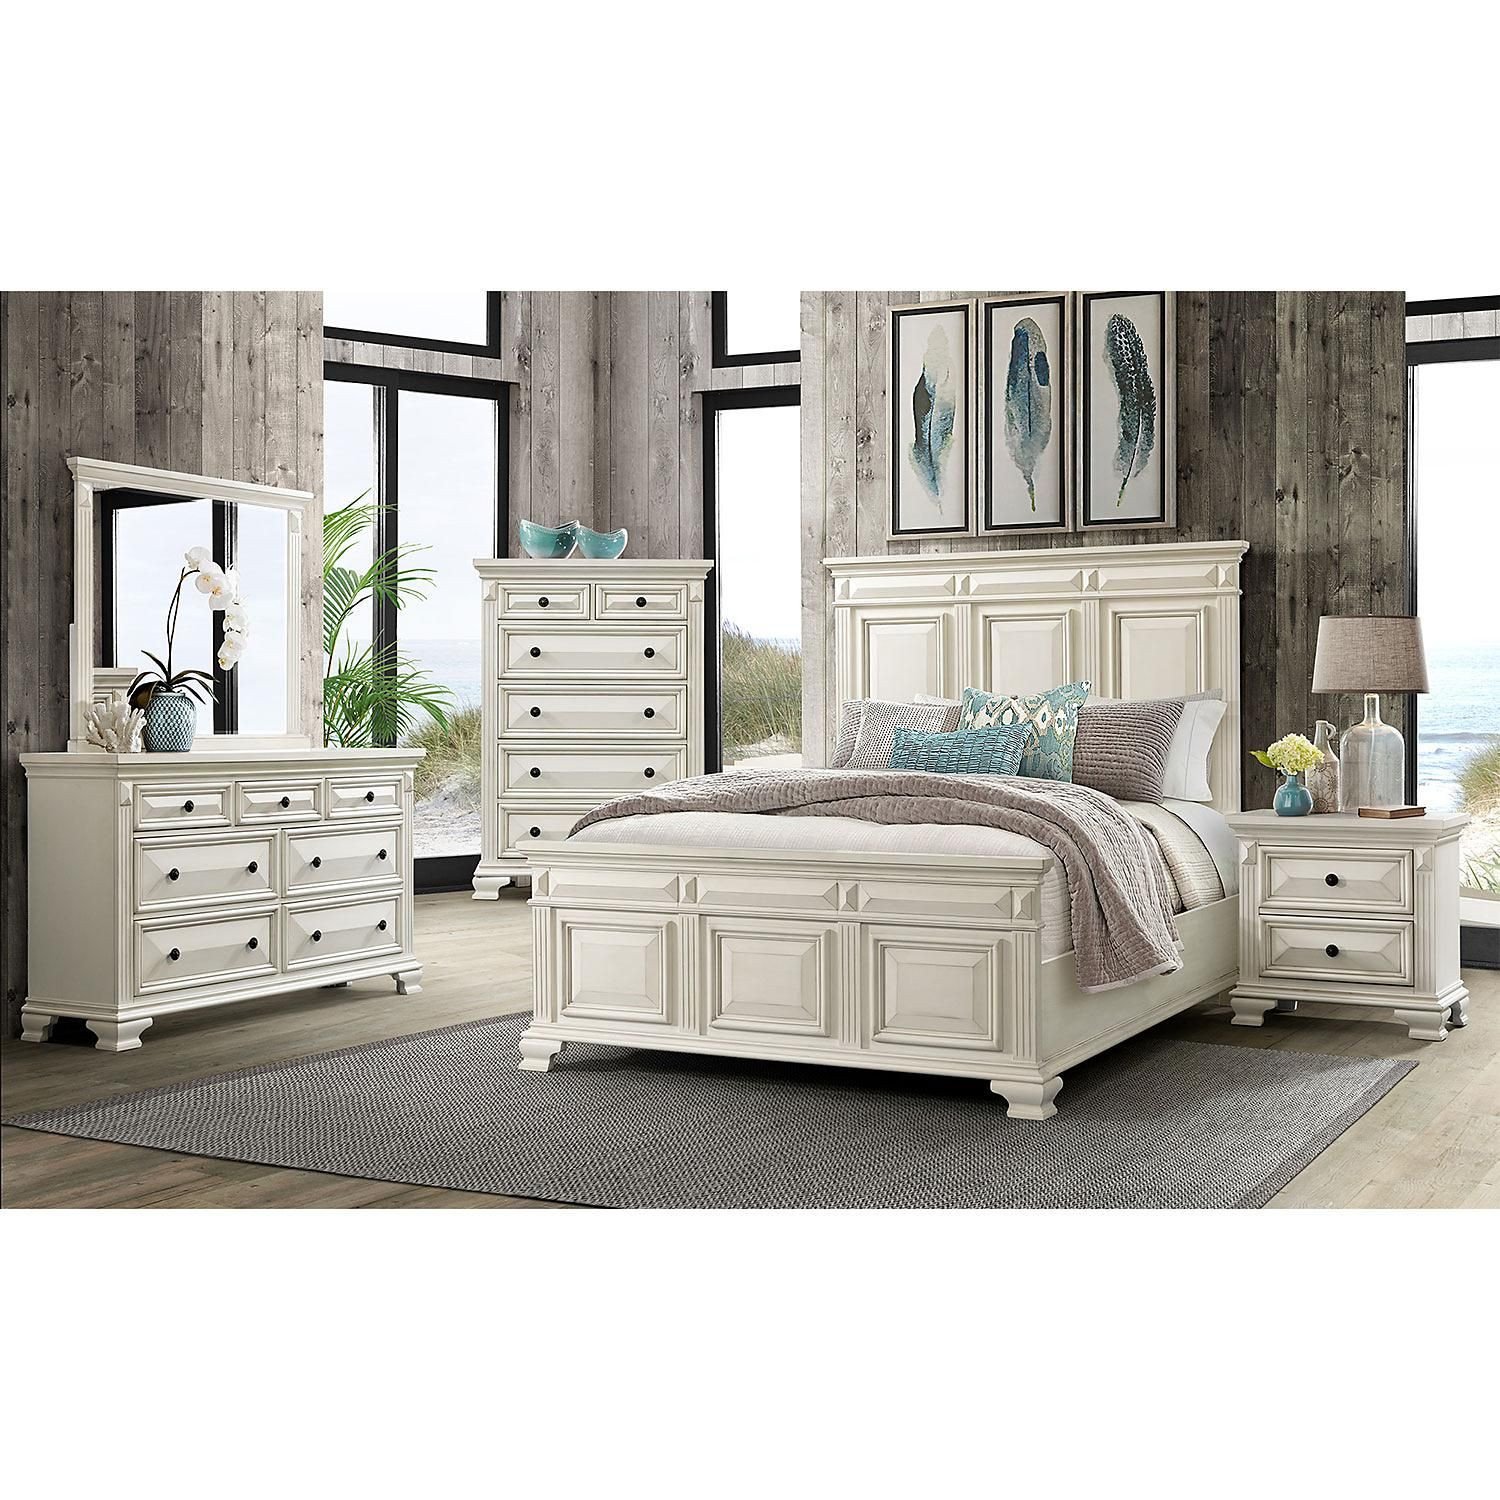 Luxury King Bedroom Set Awesome $1599 00 society Den Trent Panel 6 Piece King Bedroom Set